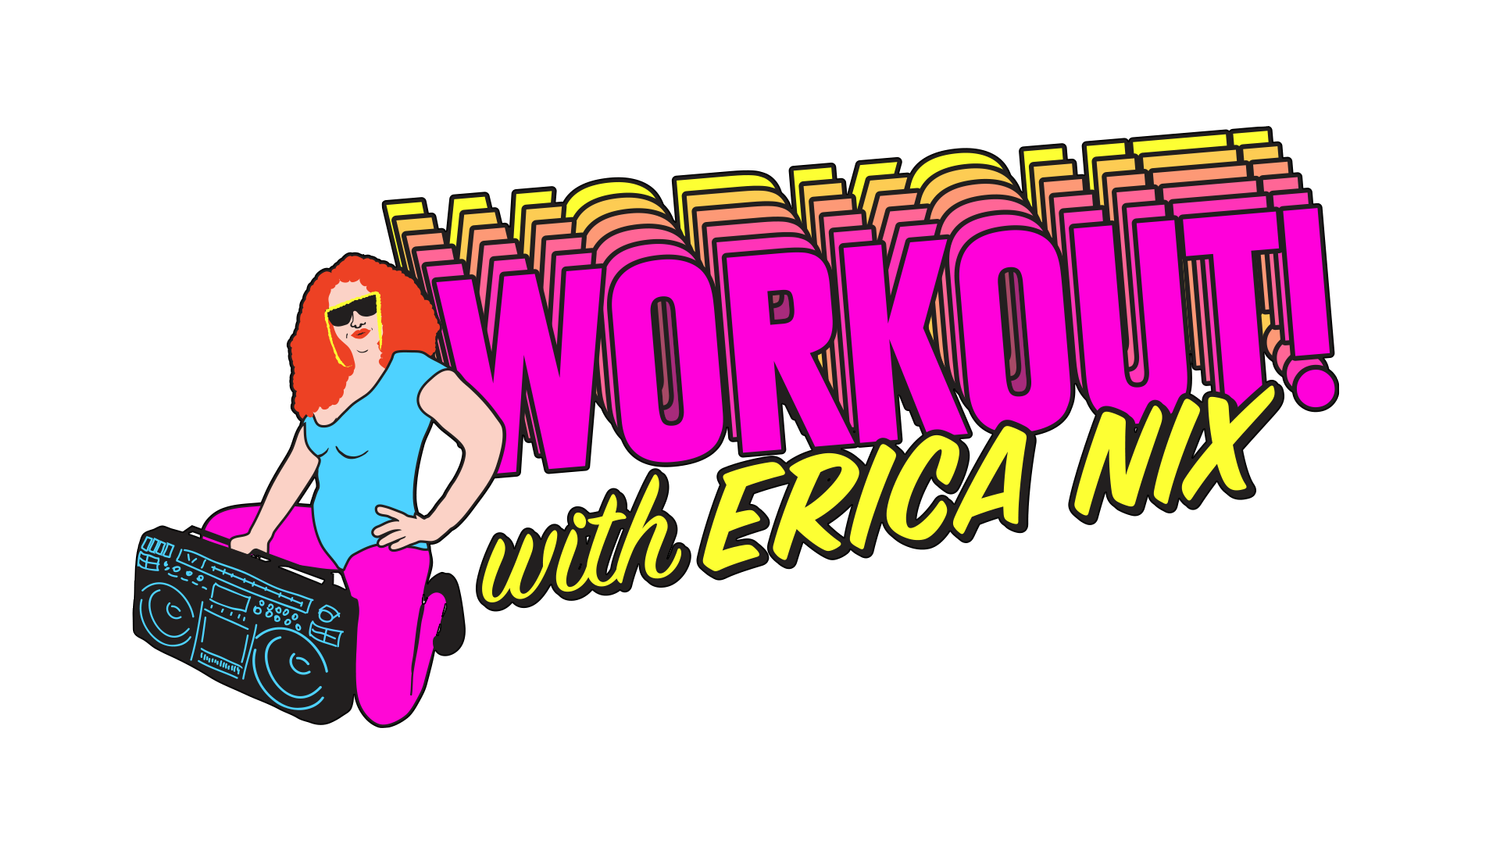 Workout! with Erica Nix